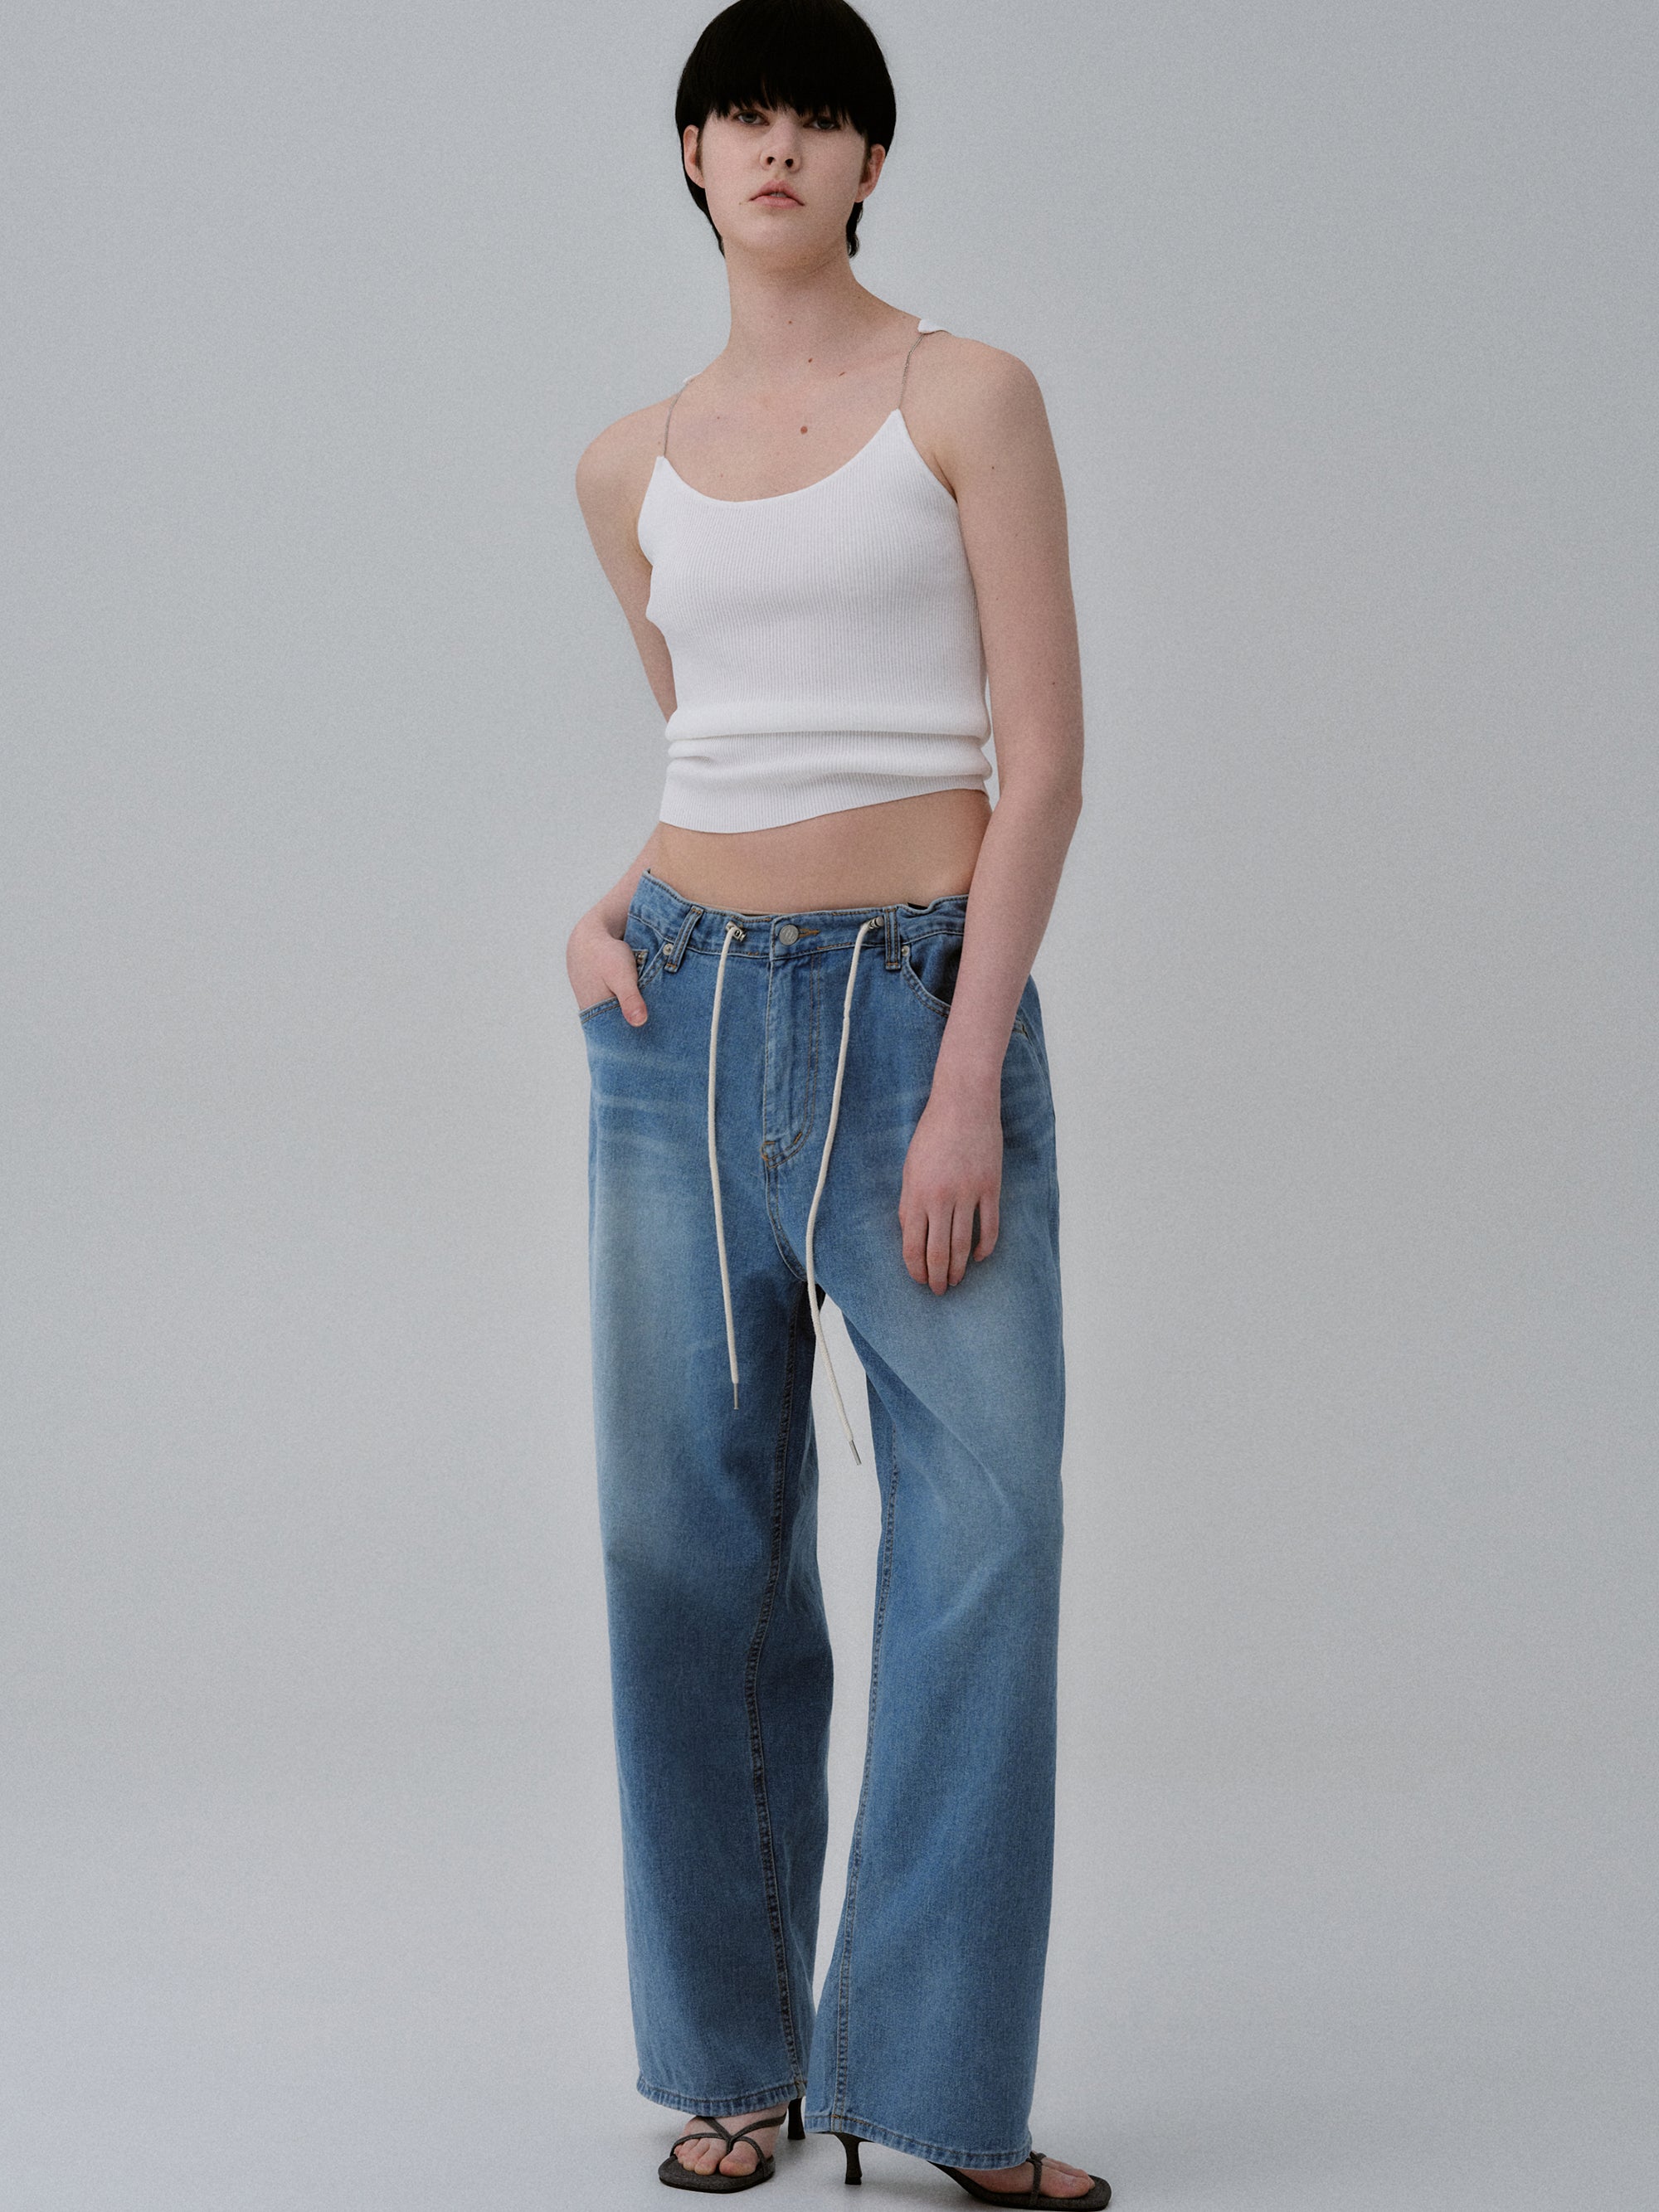 Source Unknown Exaggerated Wide-Leg Jeans